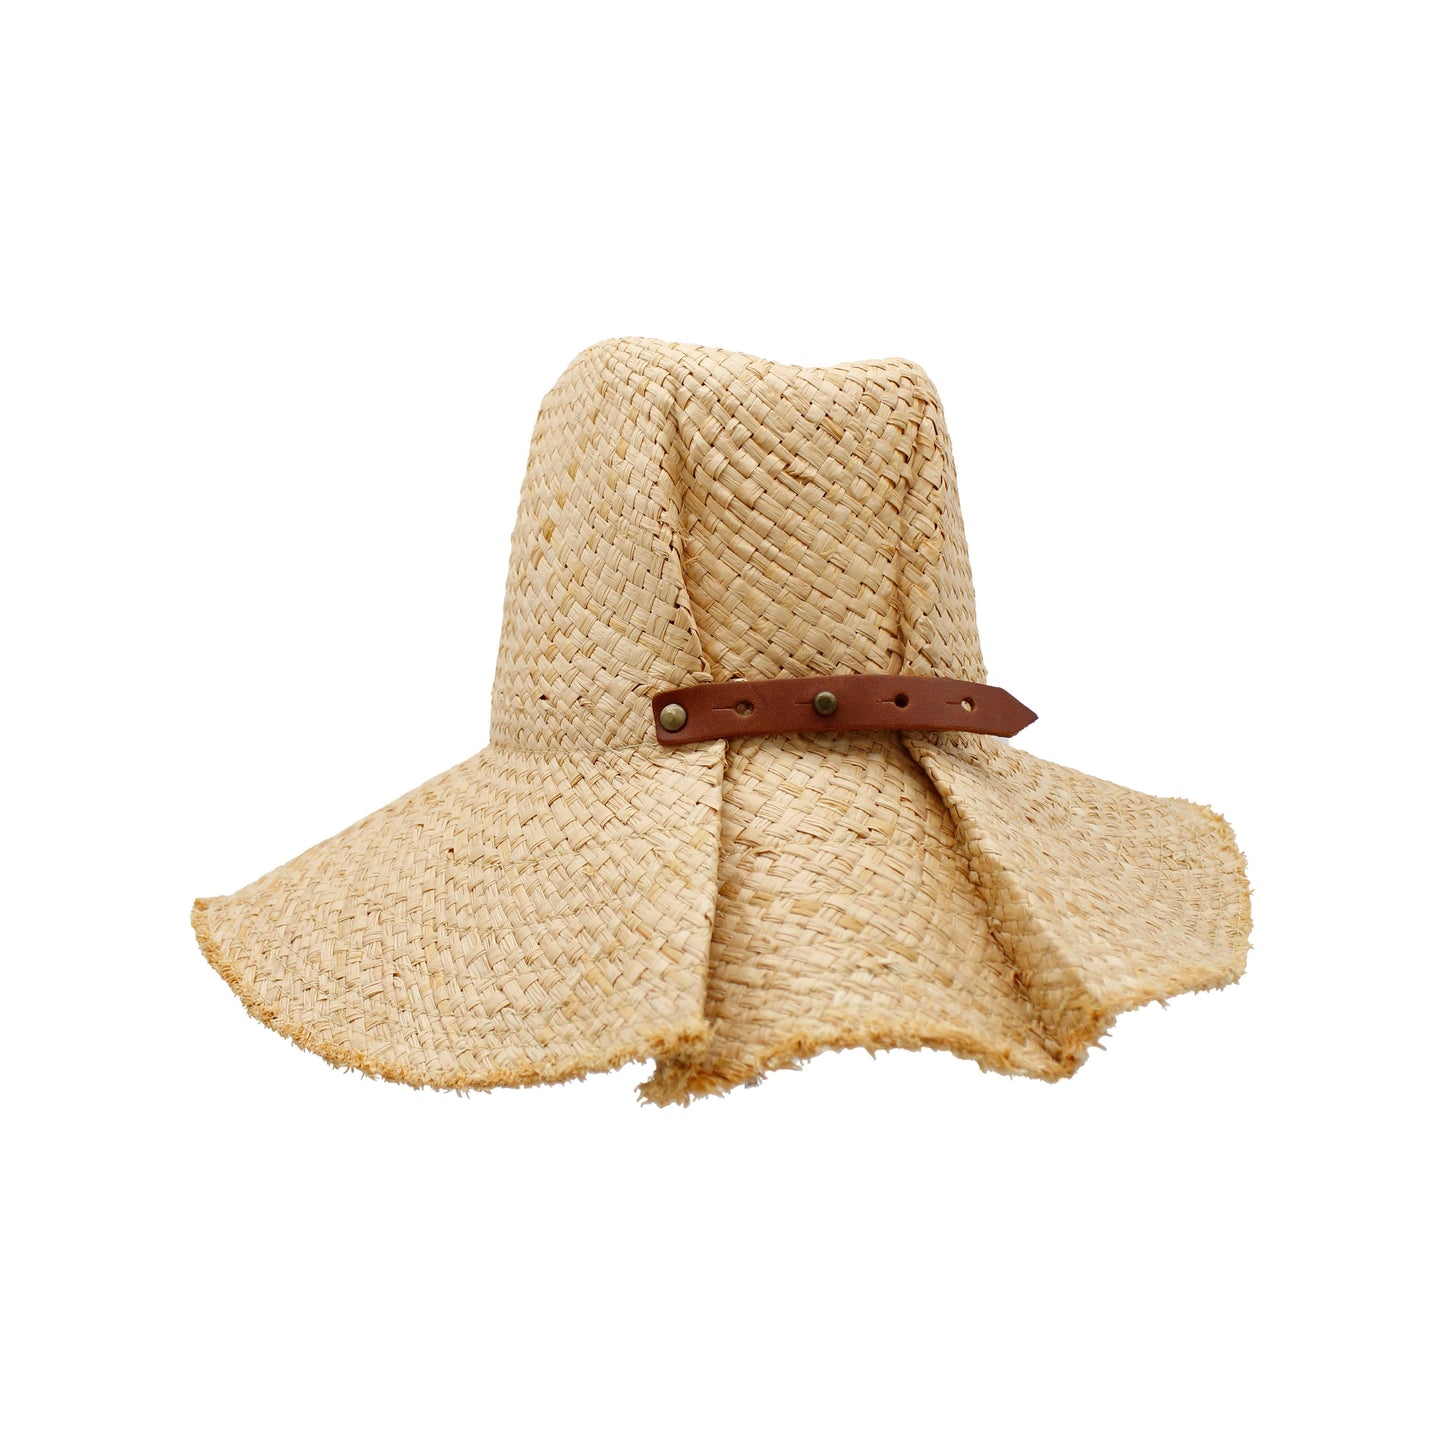 Medium-brimmed straw hat with a brown leather band, isolated on a white background by Lola Hats' Commando Natural.